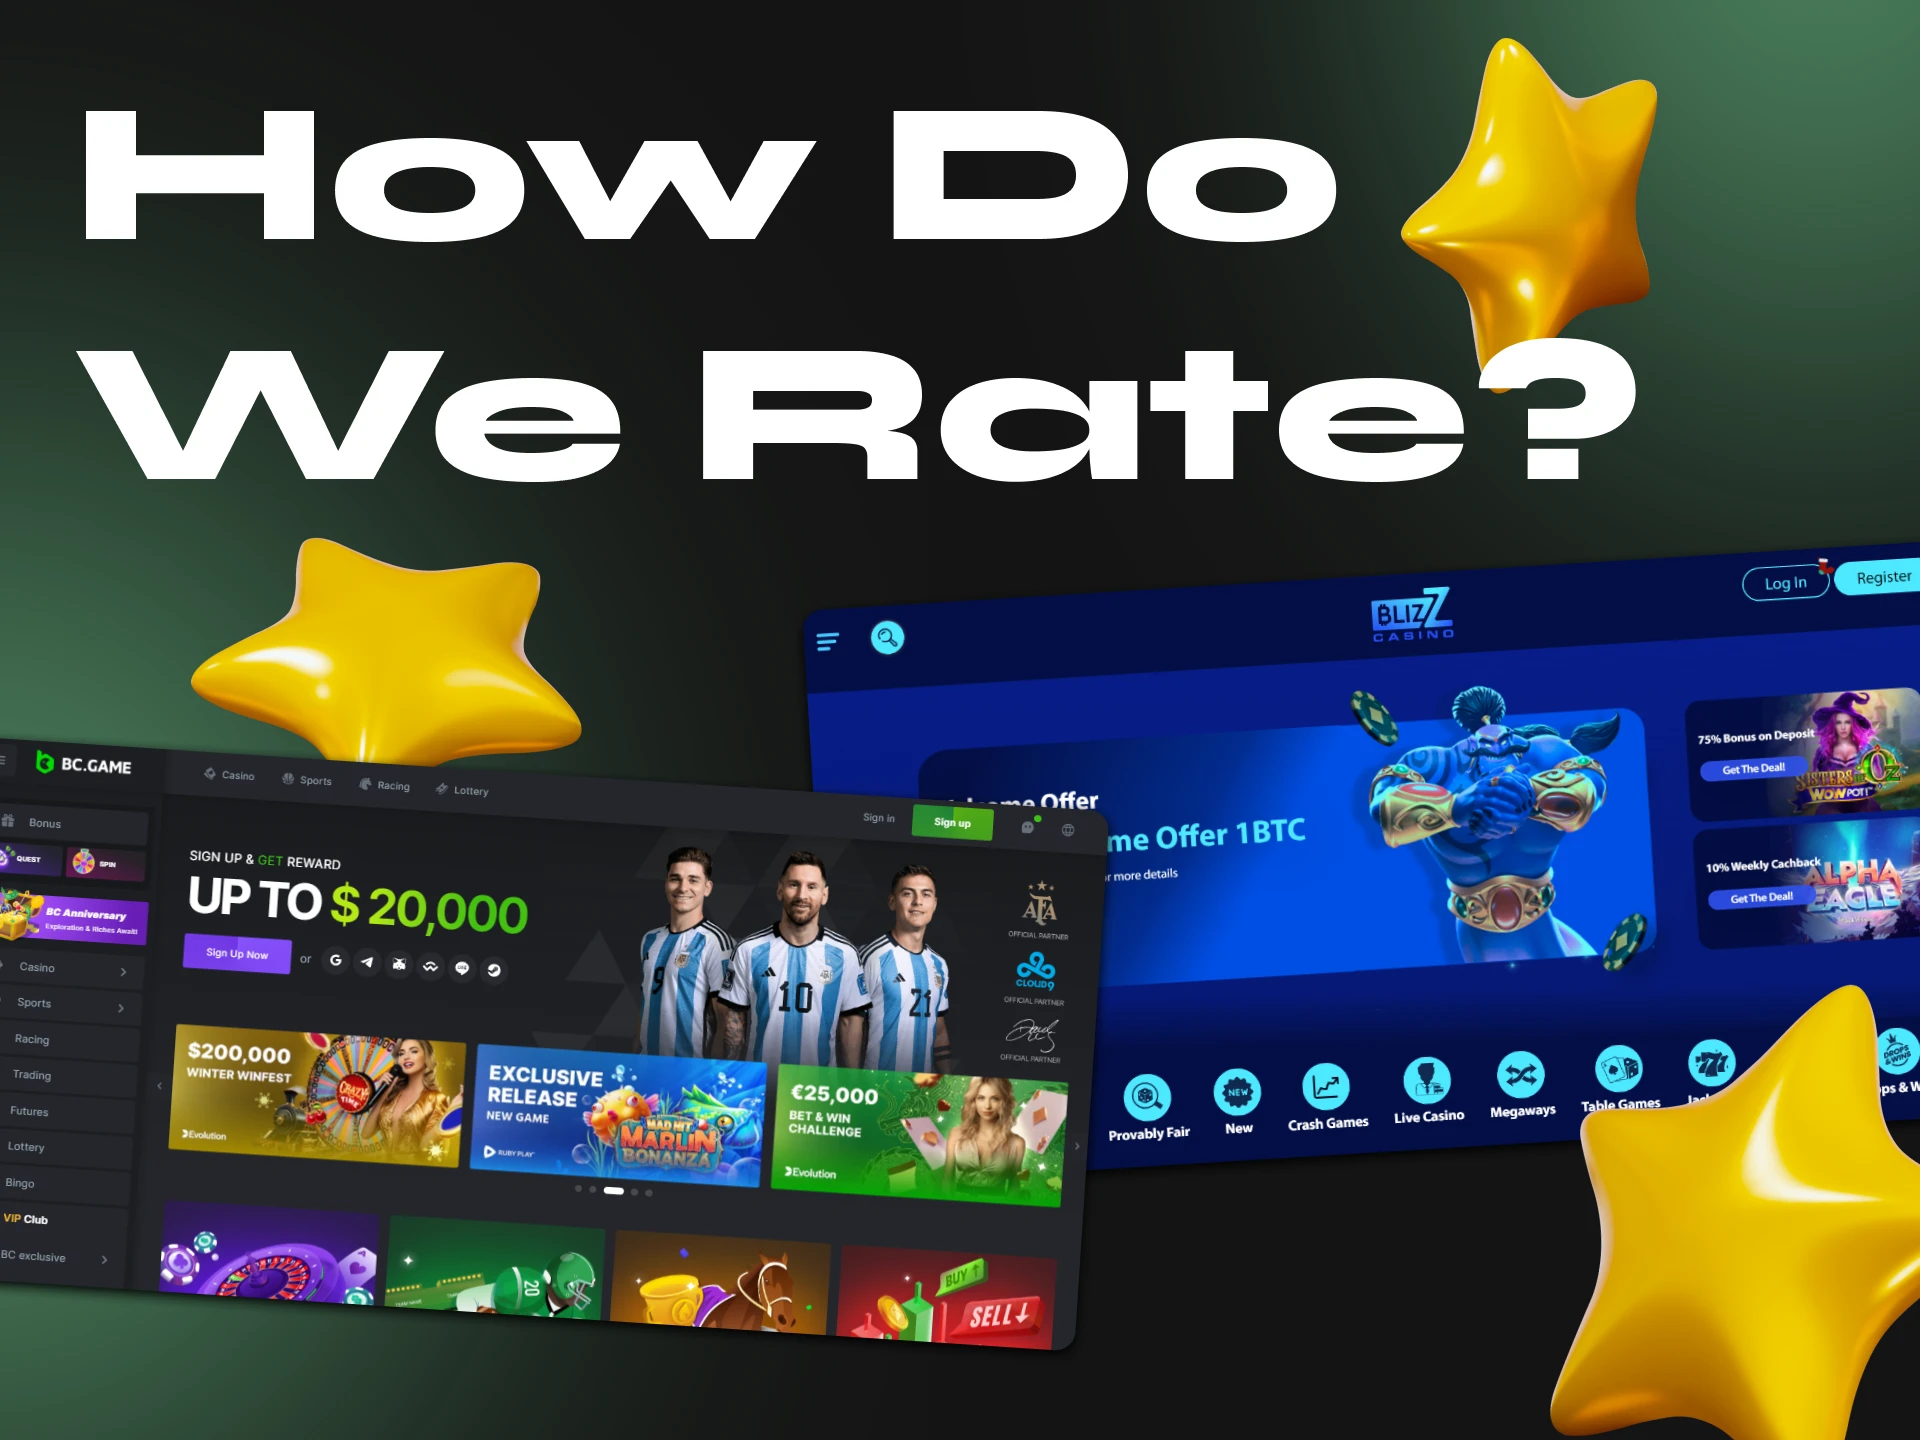 Find out what options we compare for casino ratings.